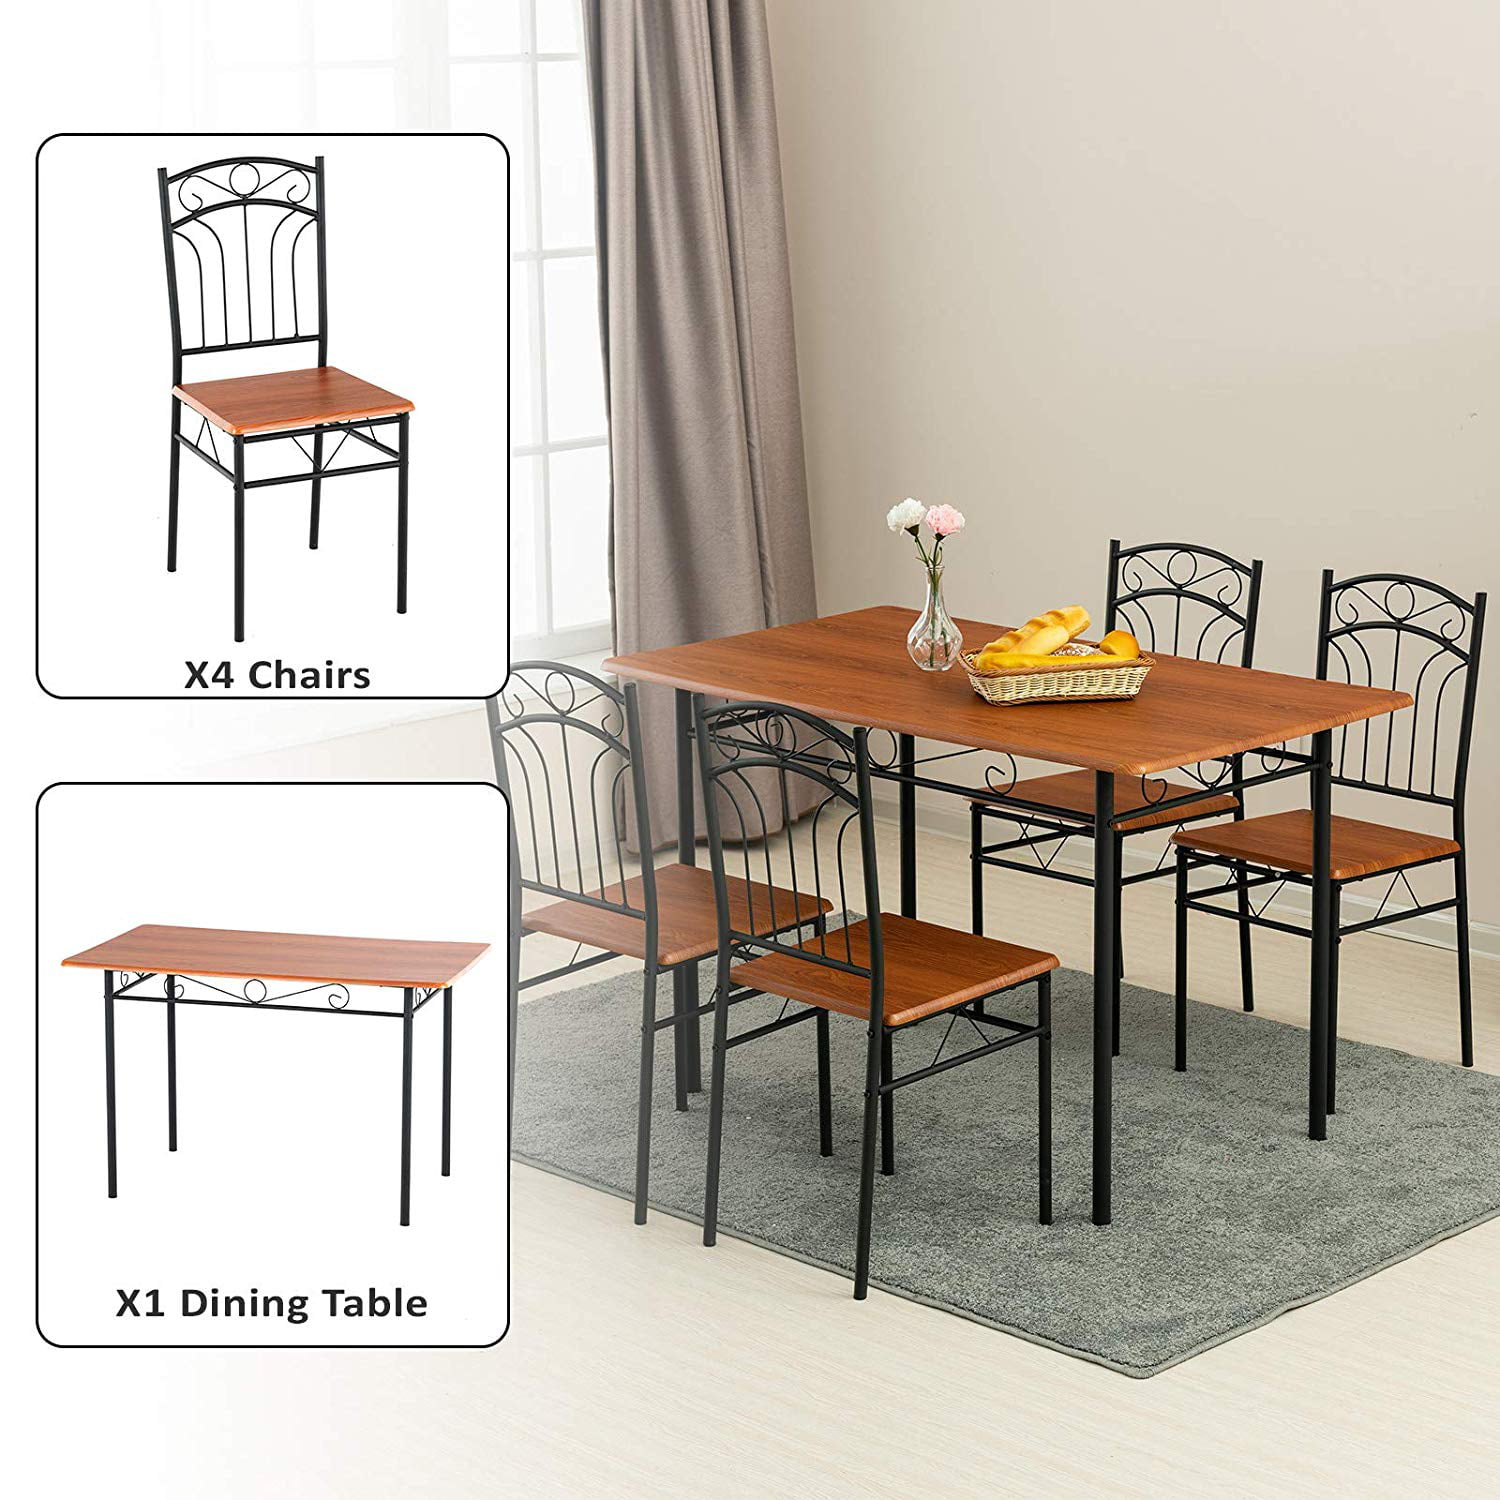 Mecor 5 Piece Dining Table Set Vintage, Vintage Metal Kitchen Table And Chairs Set